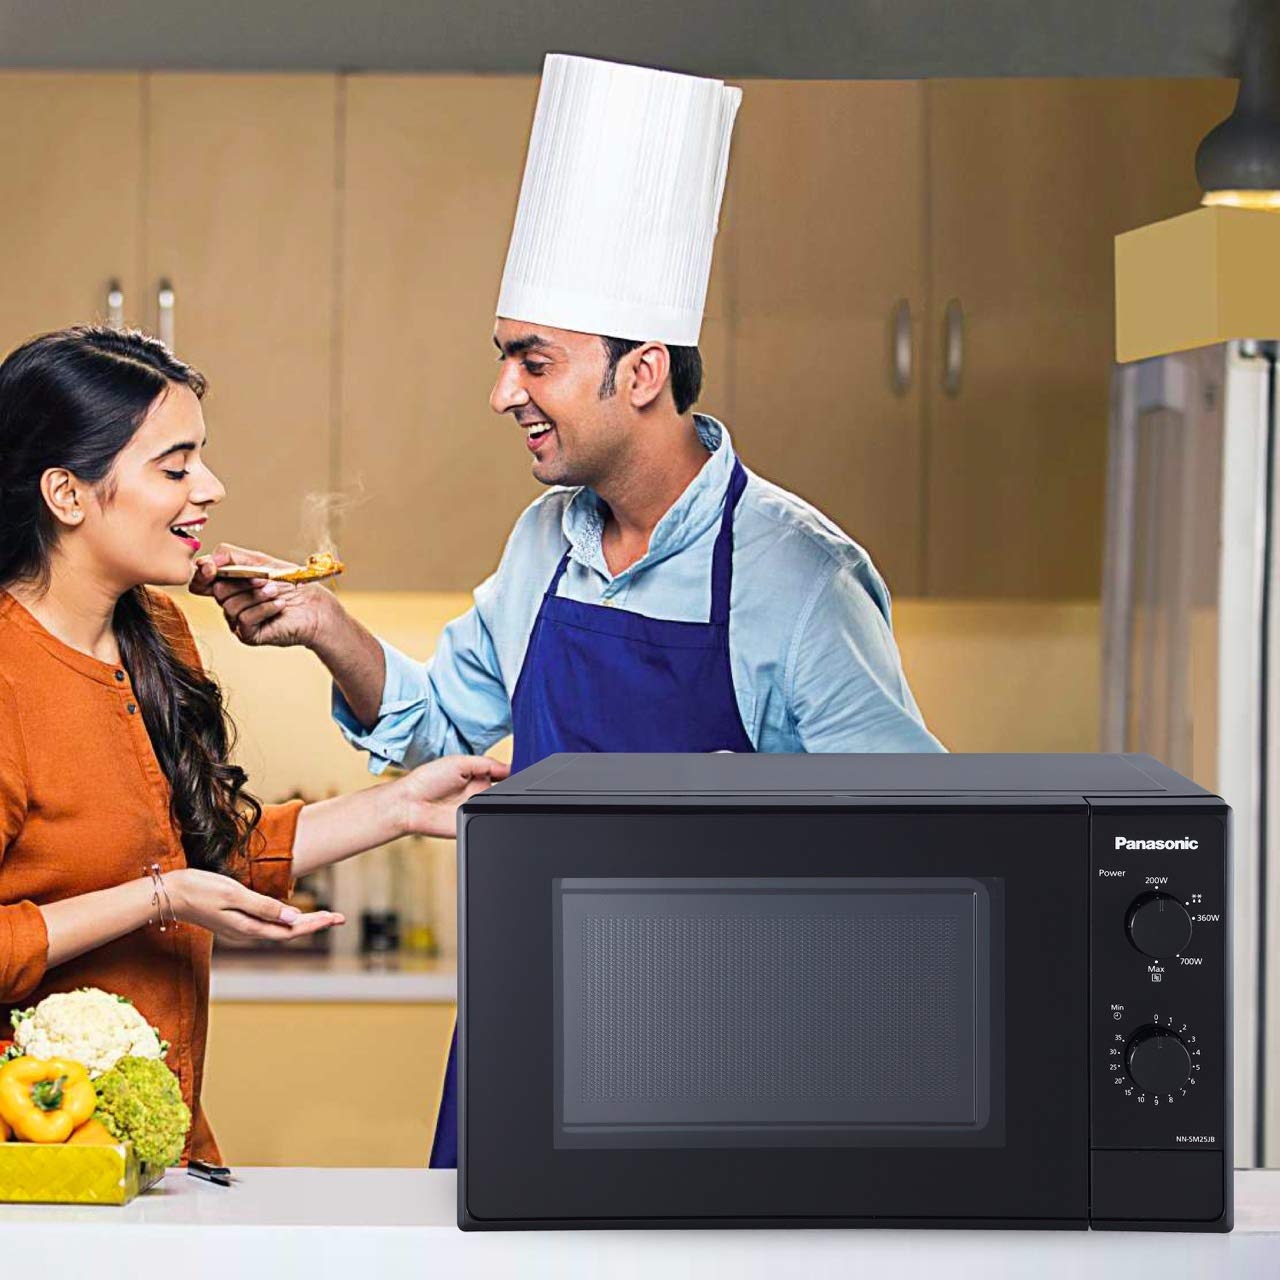 Best Panasonic Solo Microwave Ovens In India 2022!